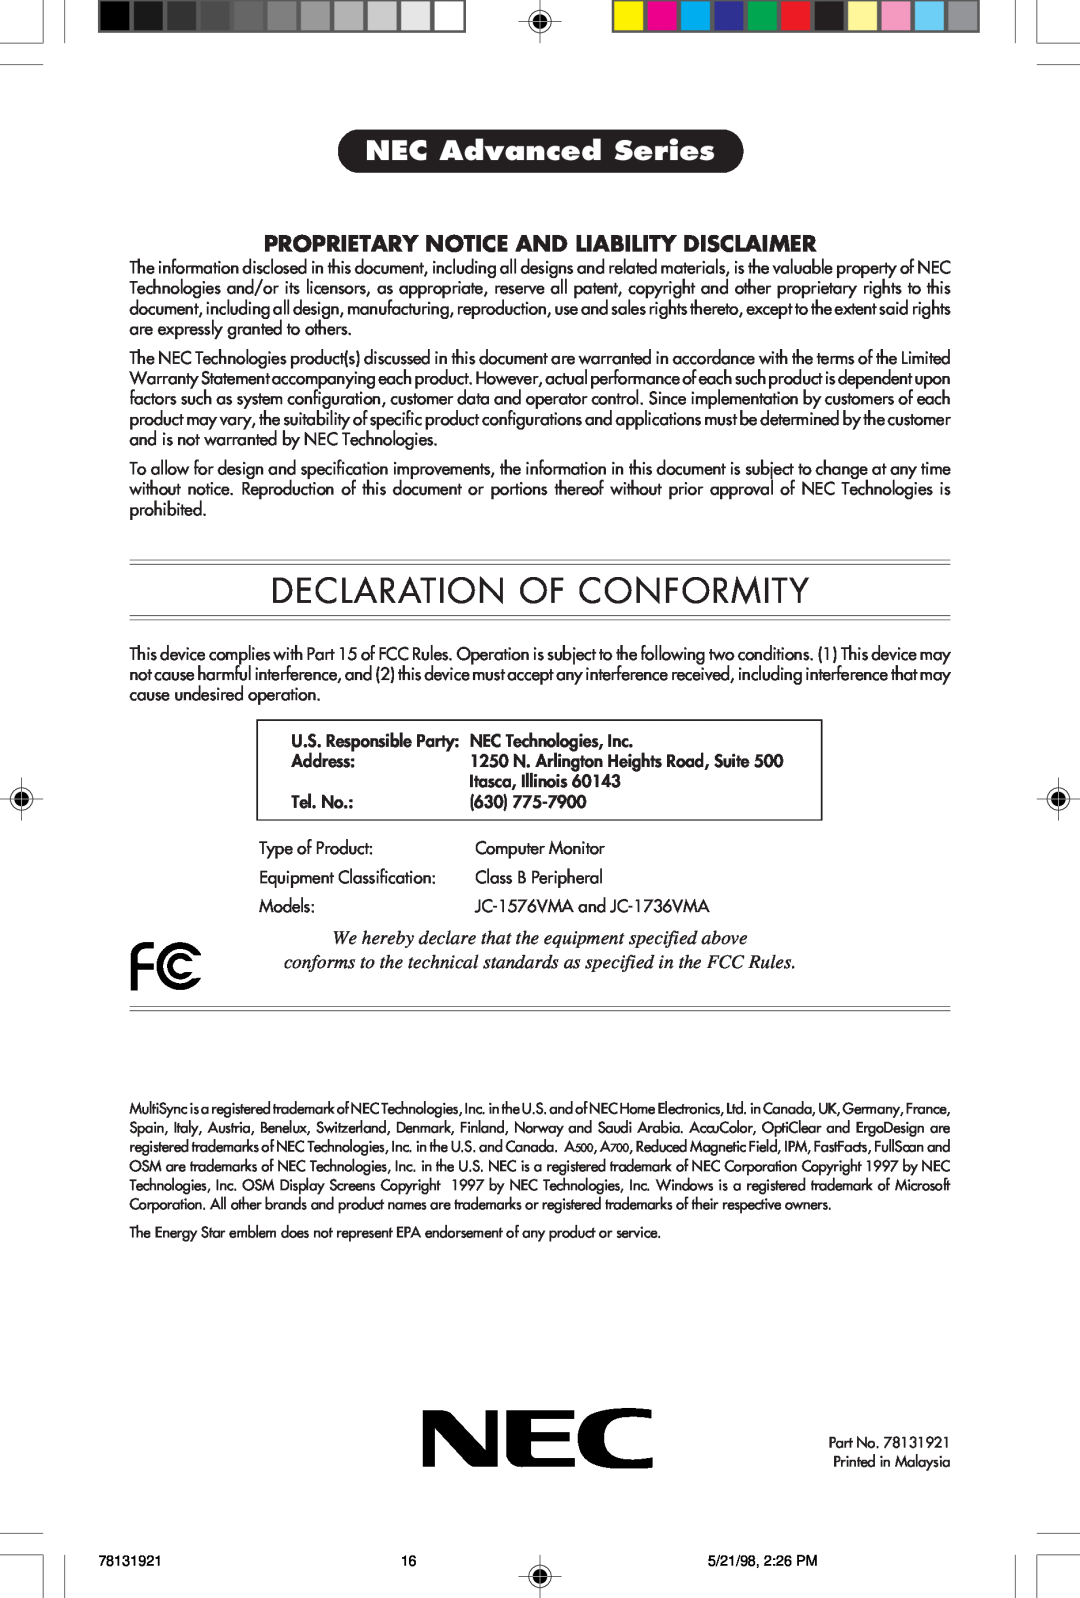 NEC A Series user manual Declaration Of Conformity, NEC Advanced Series, Proprietary Notice And Liability Disclaimer 